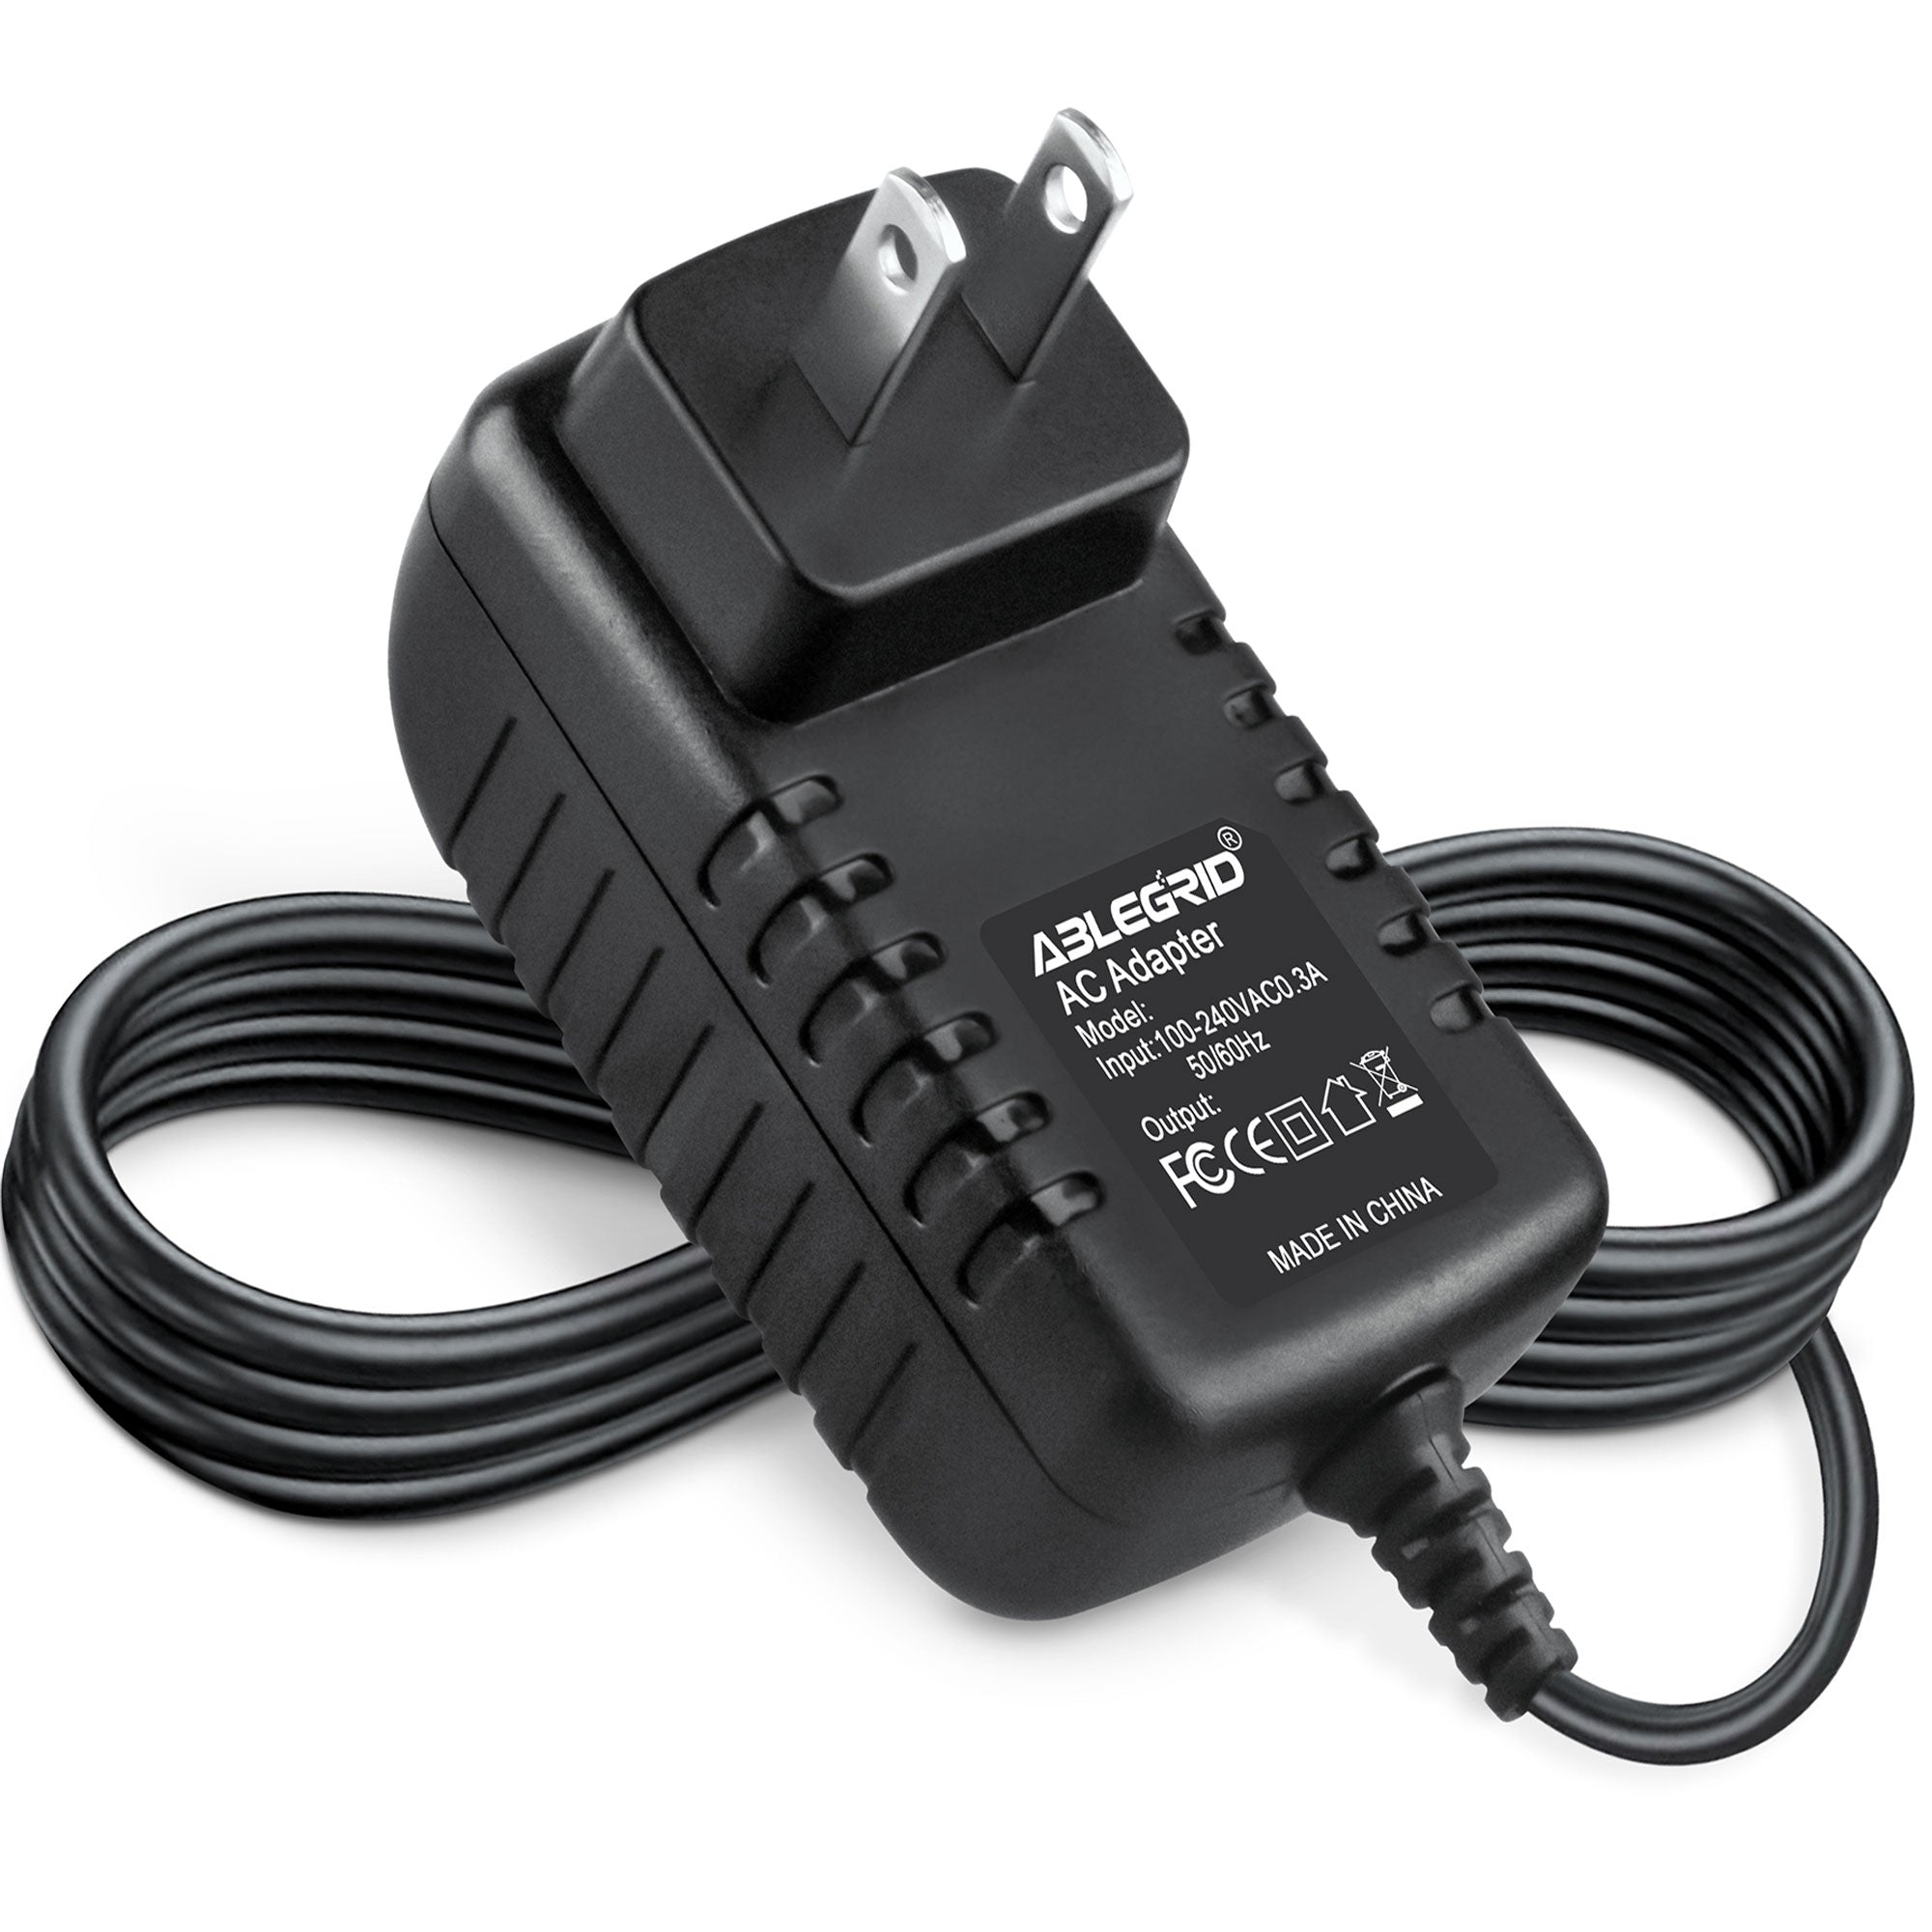 AbleGrid AC-DC Adapter for COBRA GA-CL/GA-CS P/N: E135856 Power Supply Cord Cable PS Charger Input: 100 - 240 VAC 50/60Hz Worldwide Voltage Use PSU